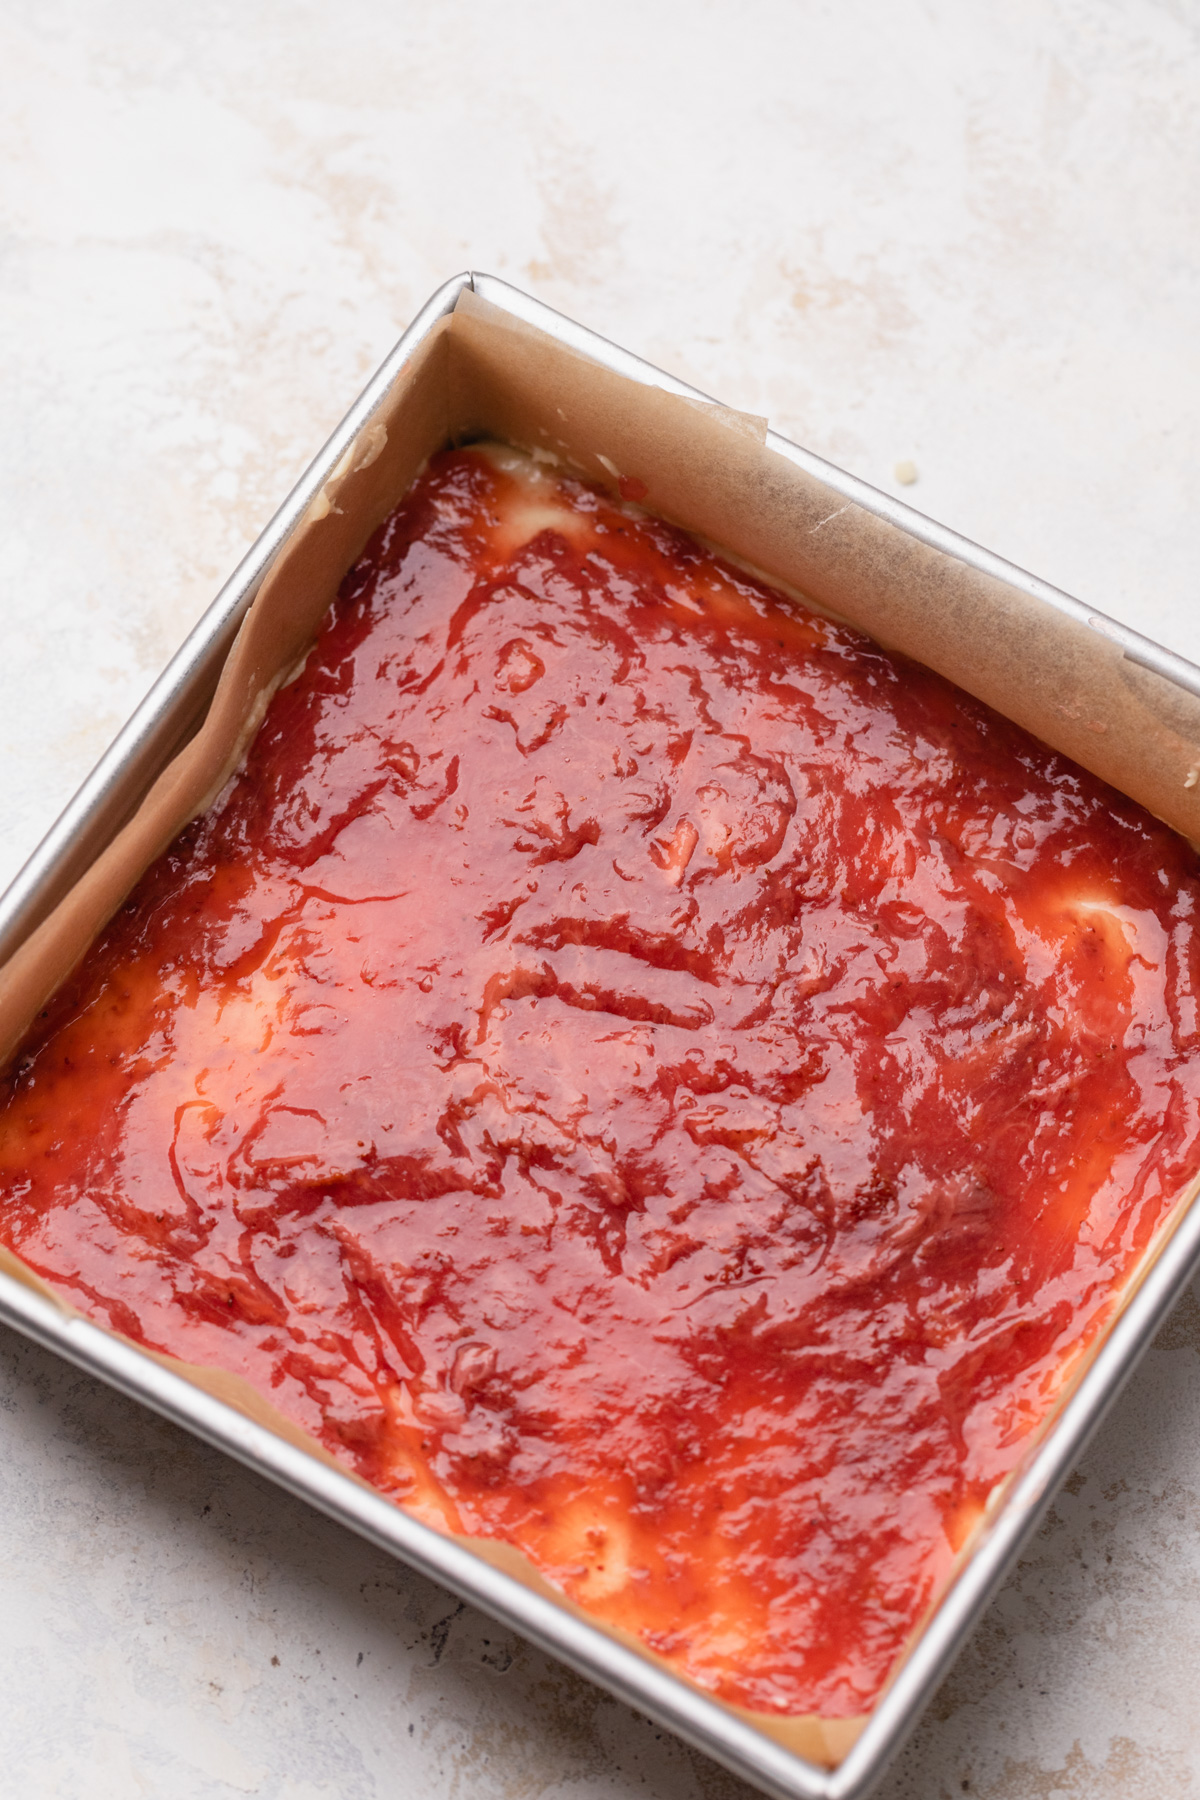 Strawberry jam spread over cake batter in a square pan.